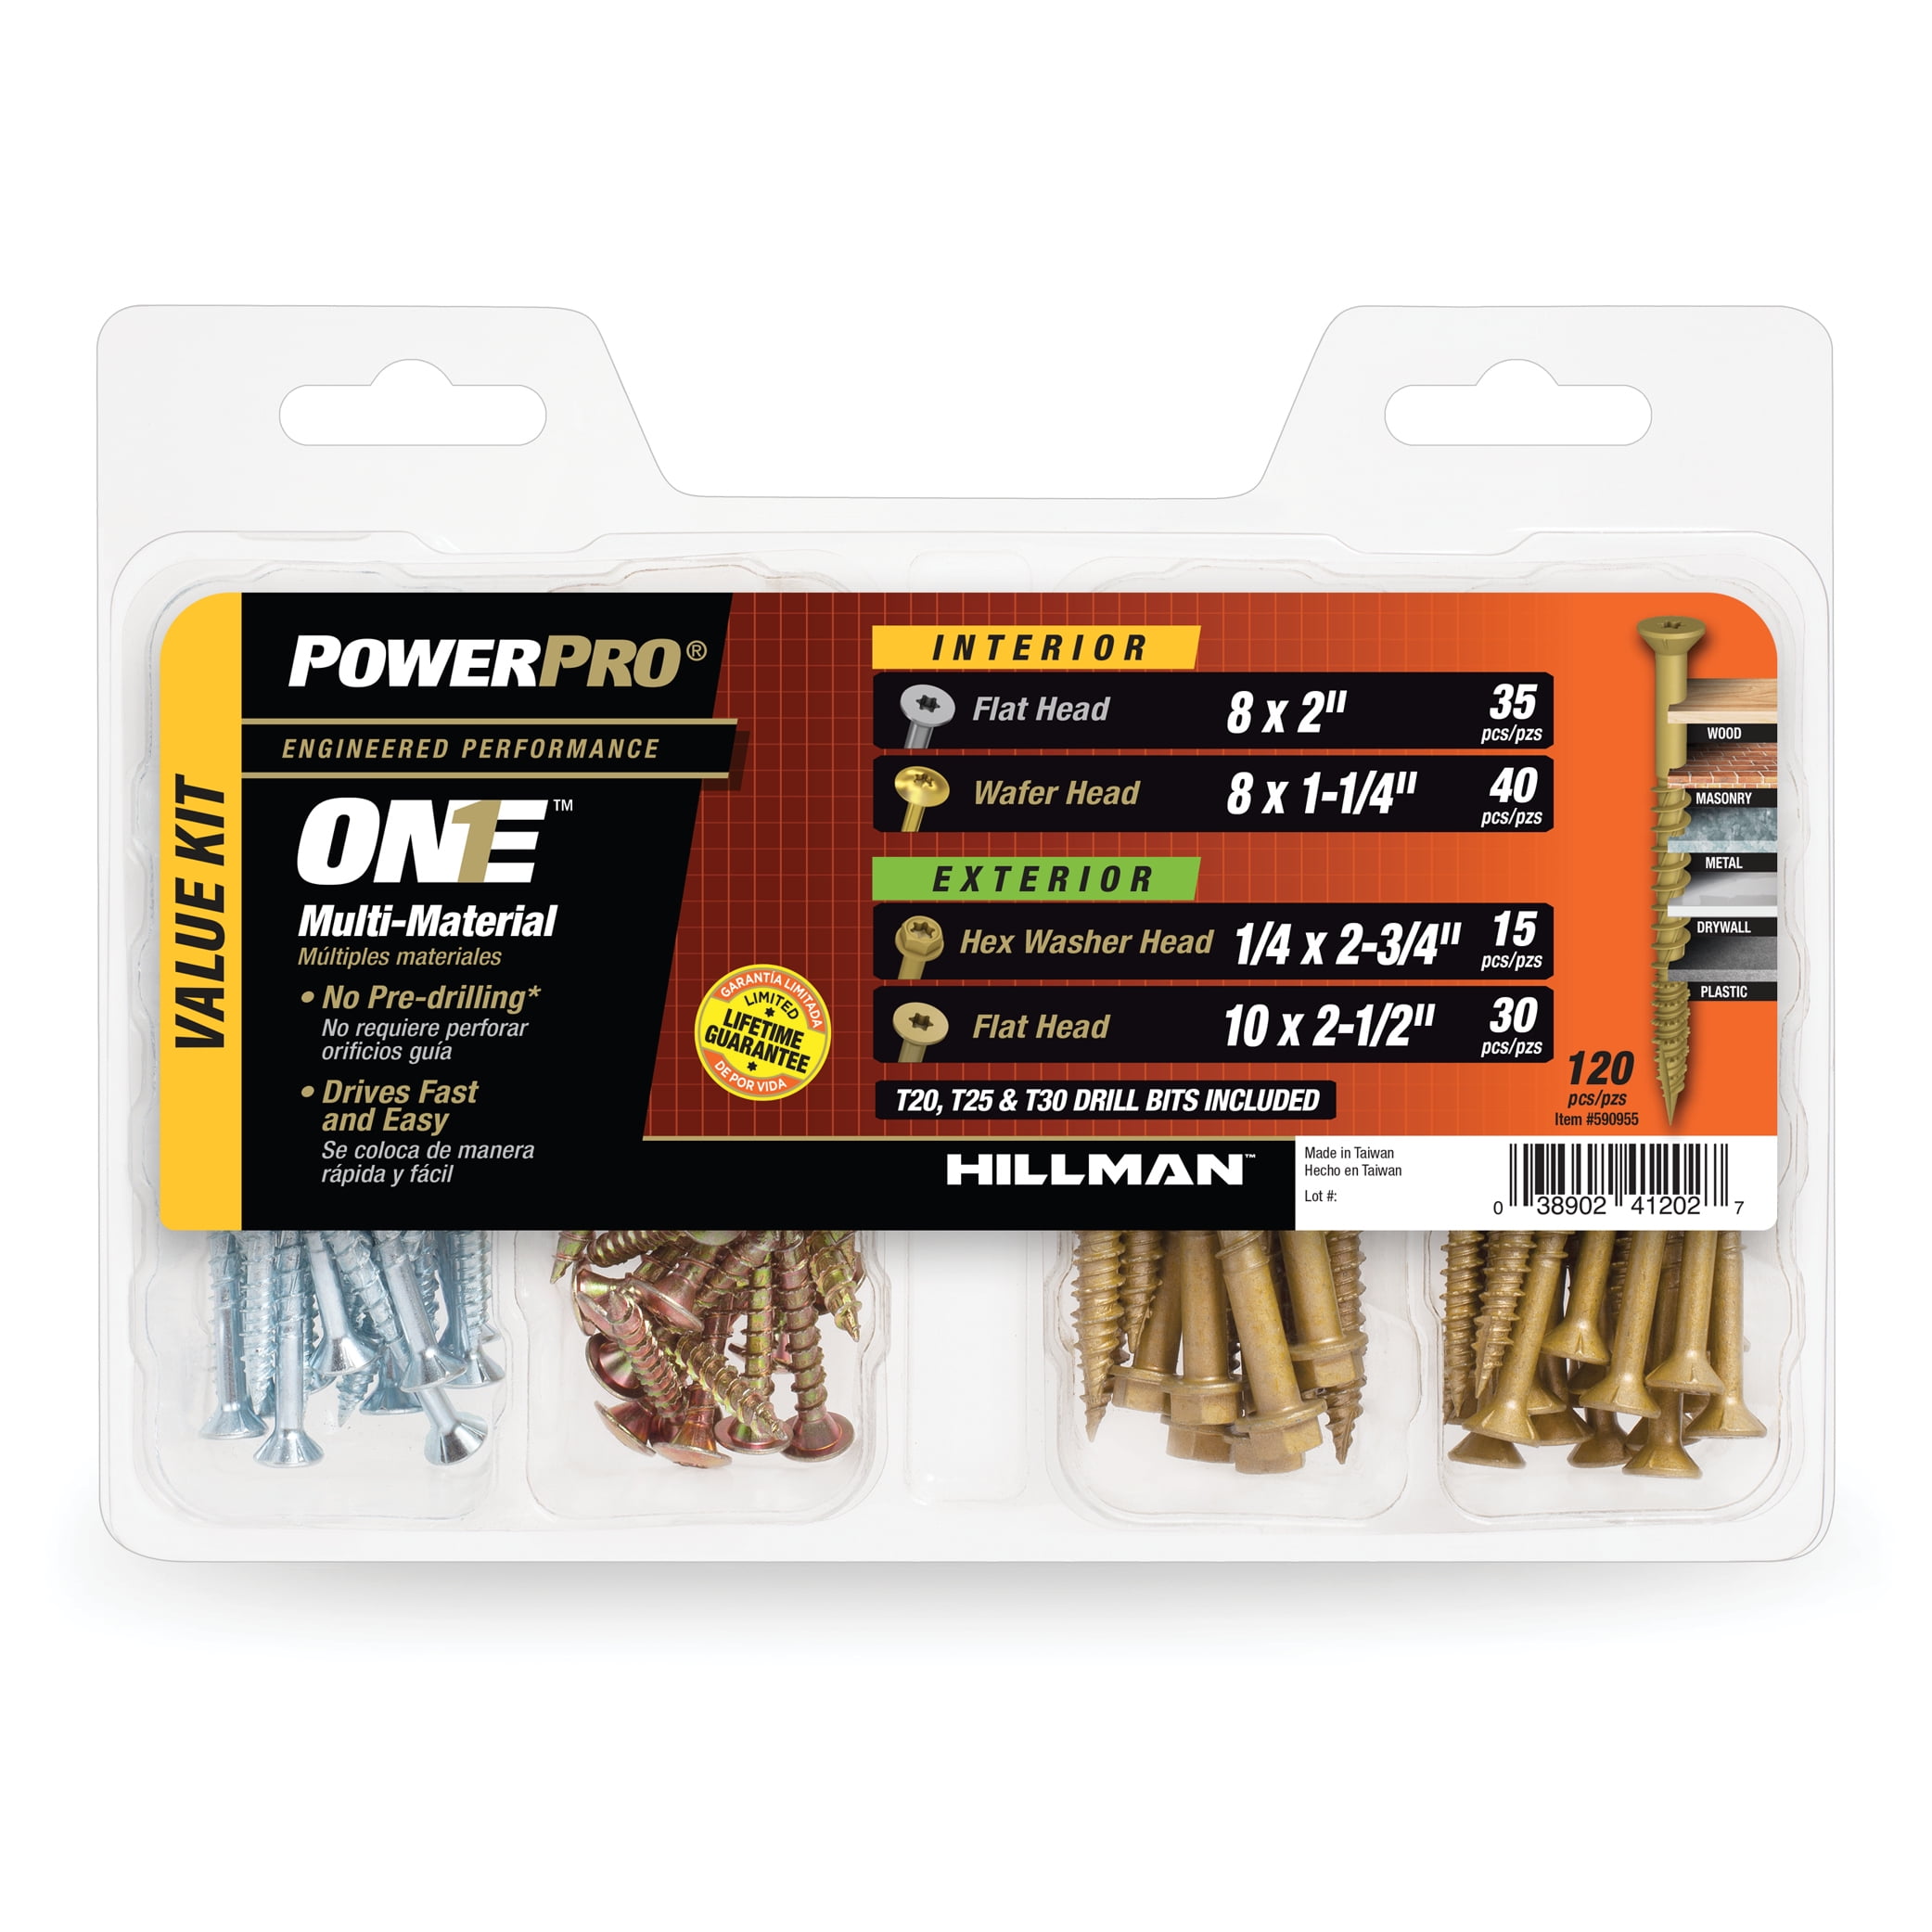 Power Pro One Interior and Exterior Screw Kit, Steel, Multi-surface, 120 Pieces